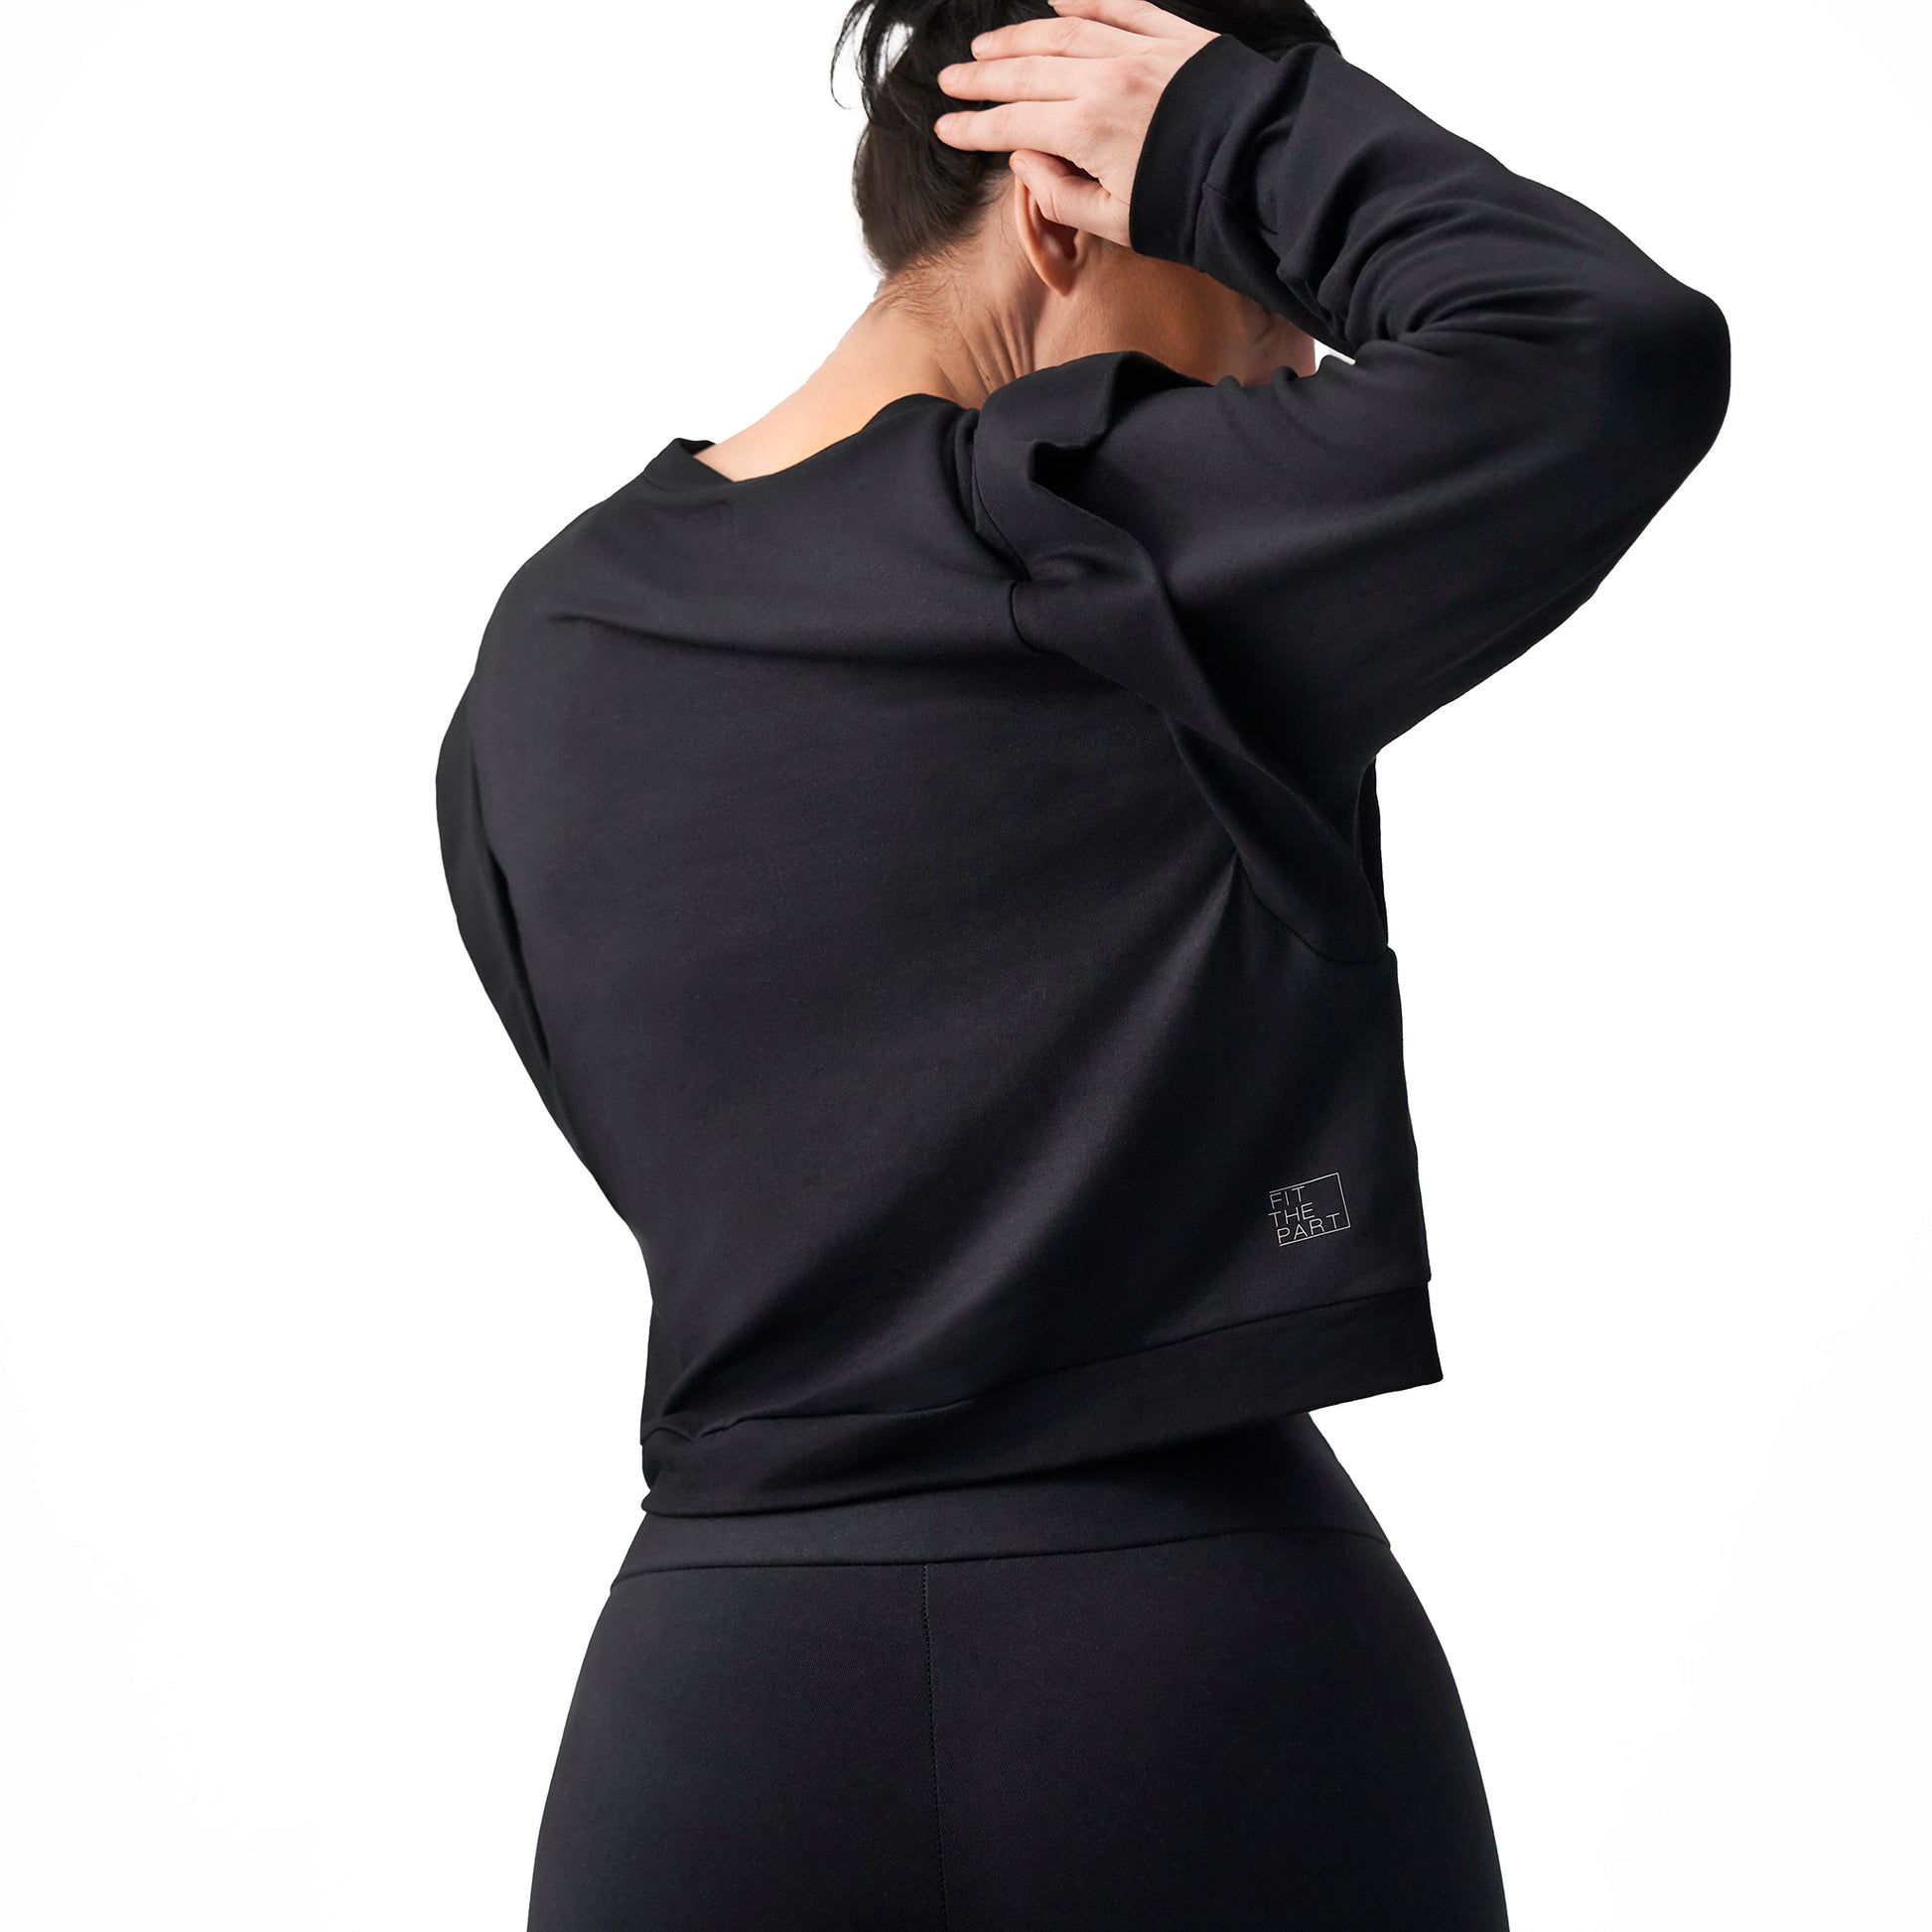 MIGHTY- LUXE SWEATSHIRT - FIT THE PART